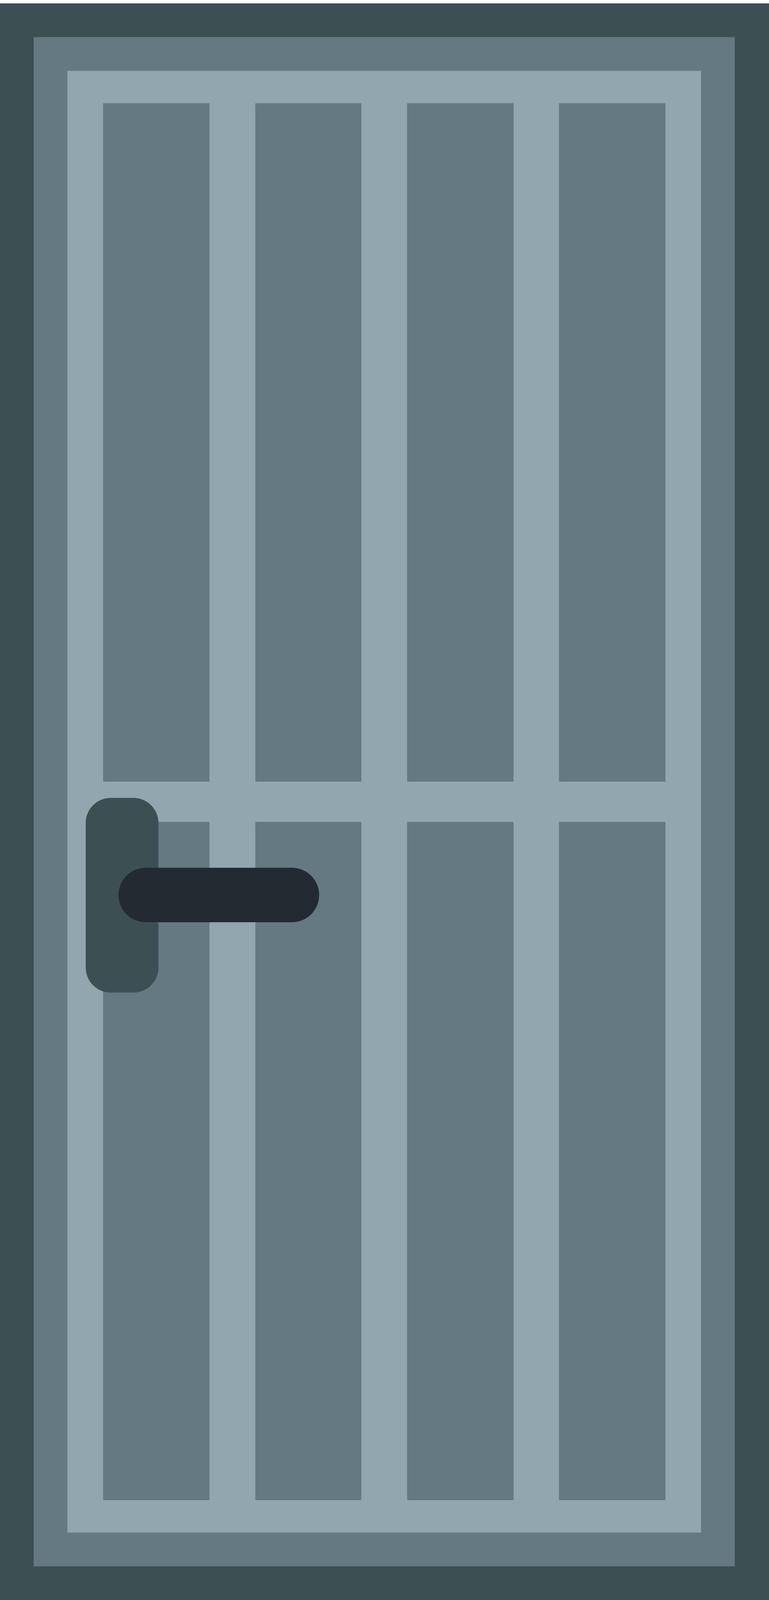 Steel door icon, flat style by ylivdesign